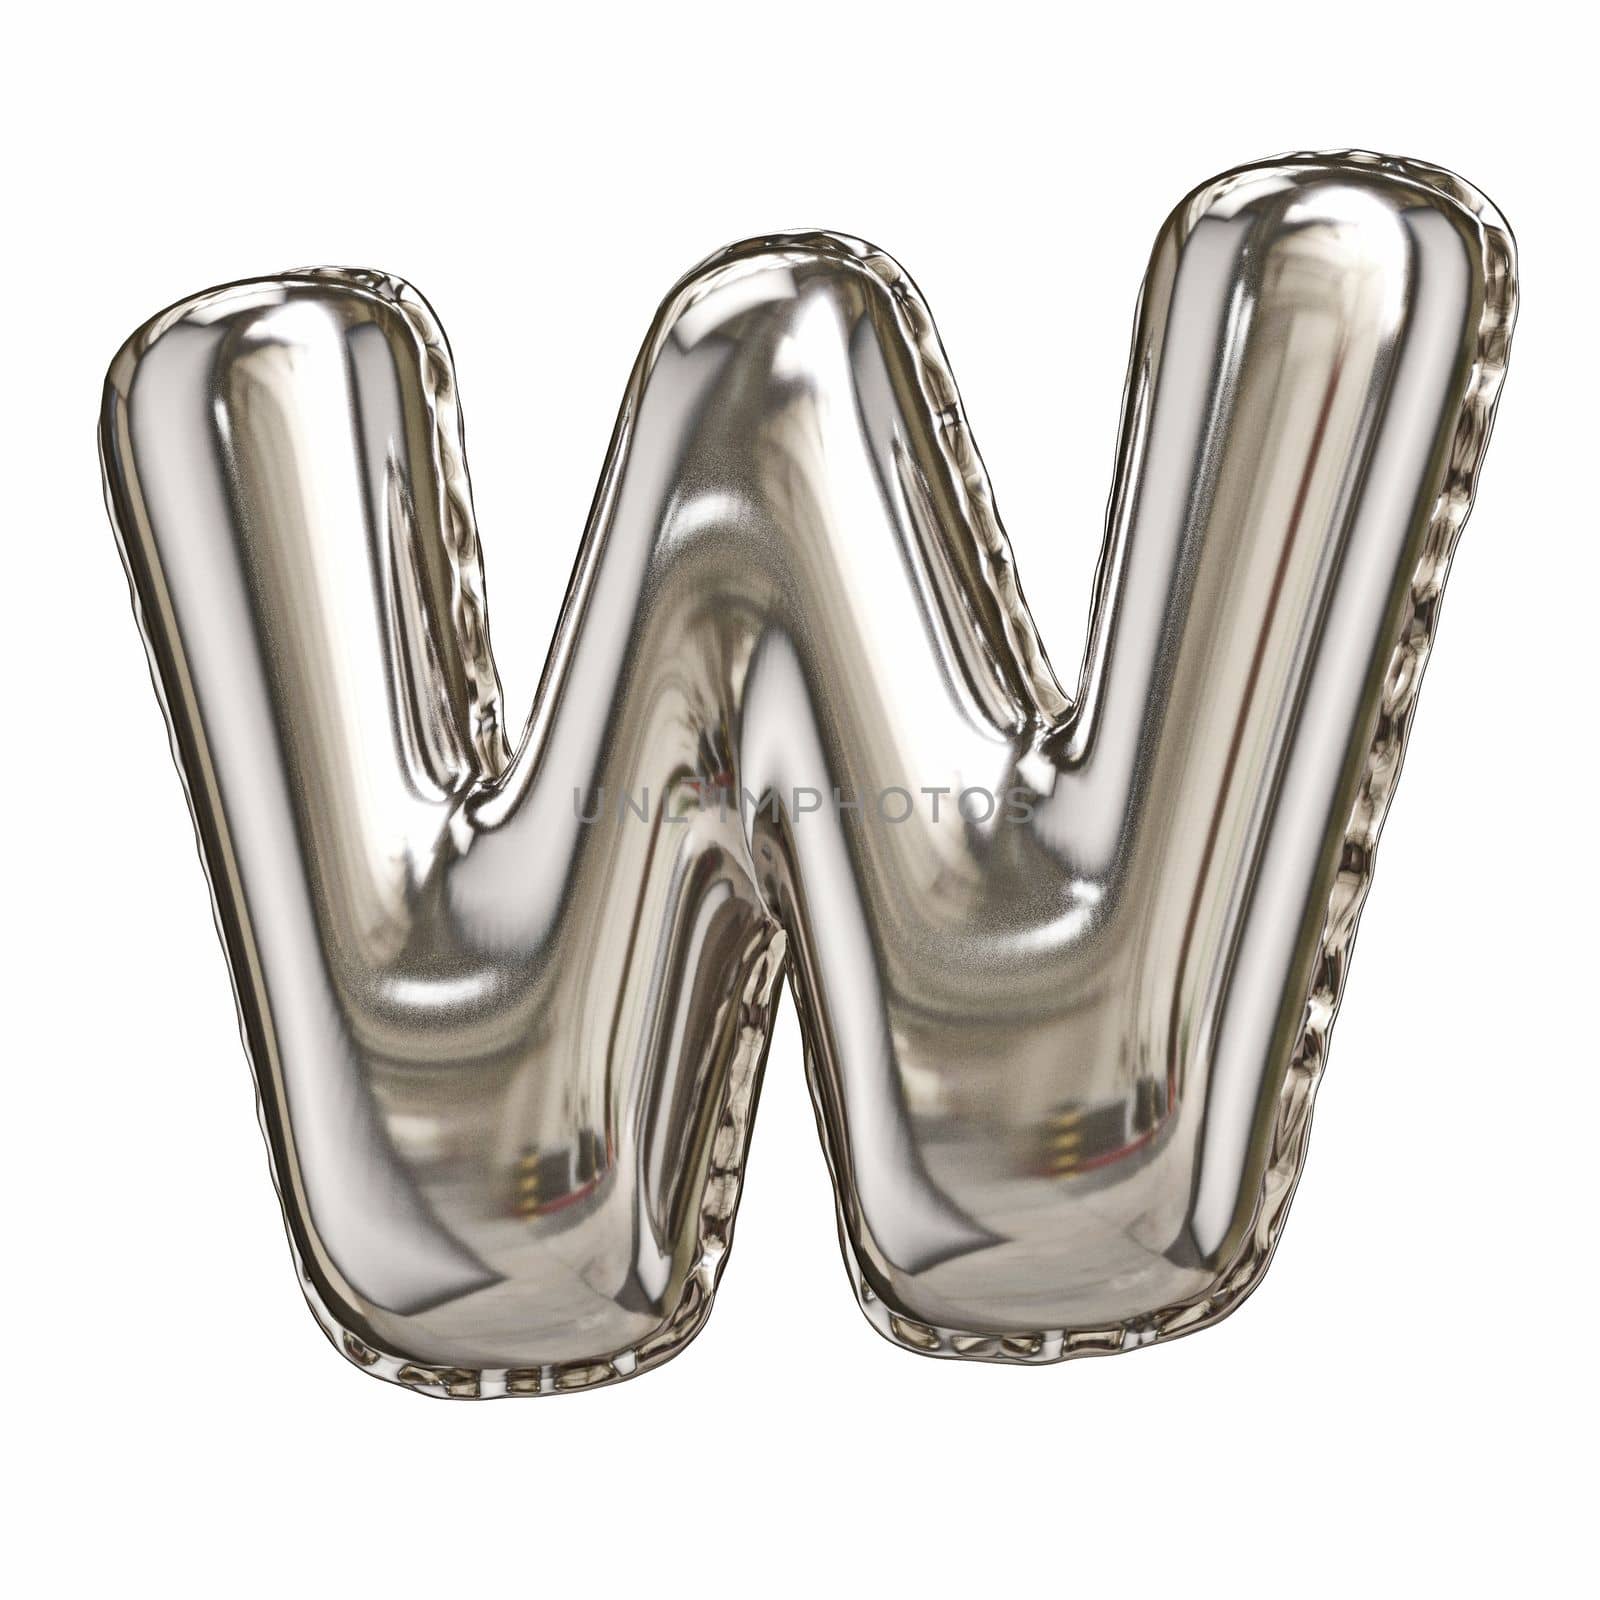 Silver foil balloon font letter W 3D rendering illustration isolated on white background